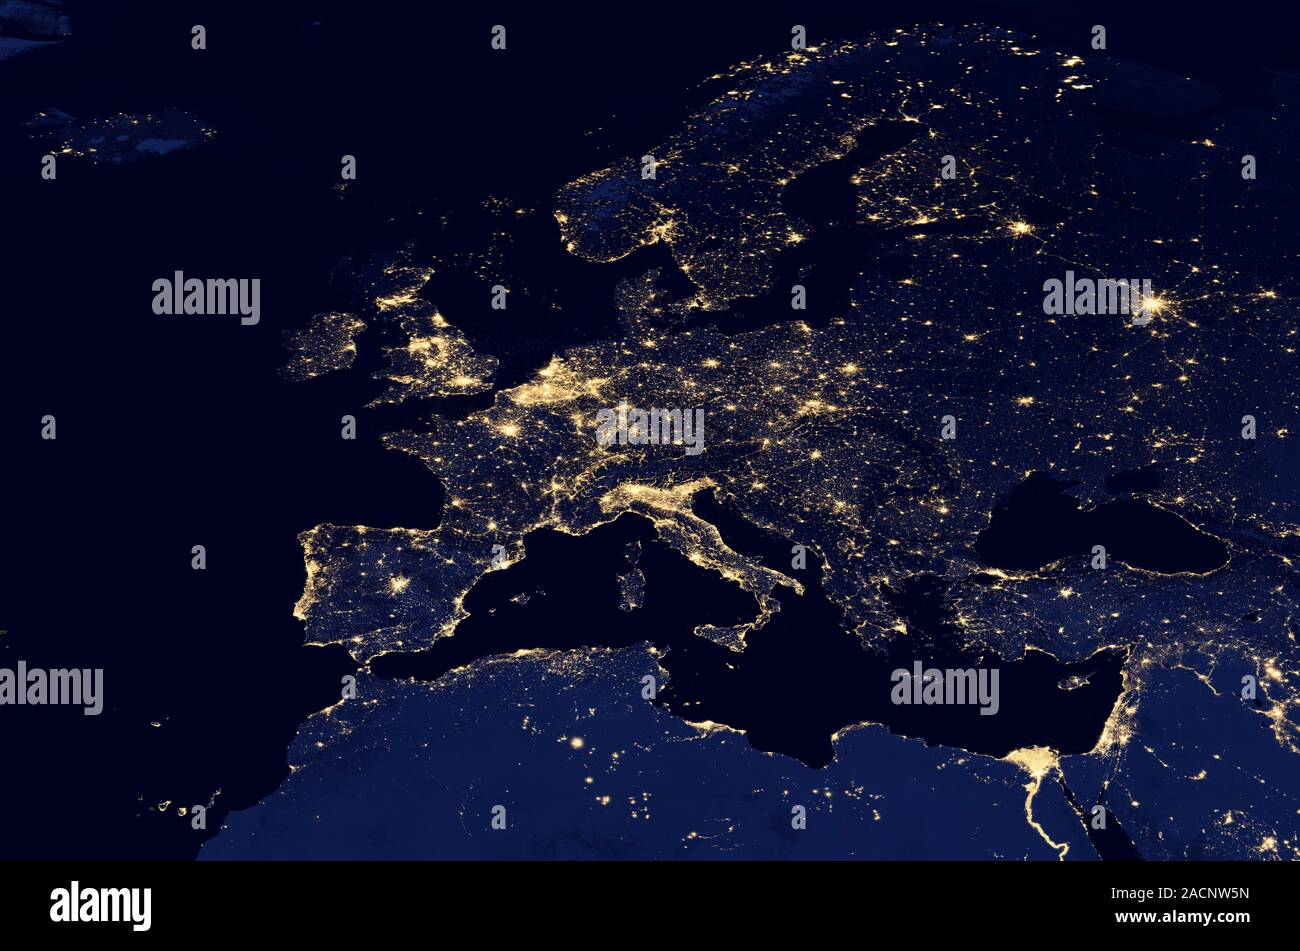 Europe at night. Black marble satellite image of Europe at night. More densely populated areas are brighter. Lights from ships and flares from gas and Stock Photo